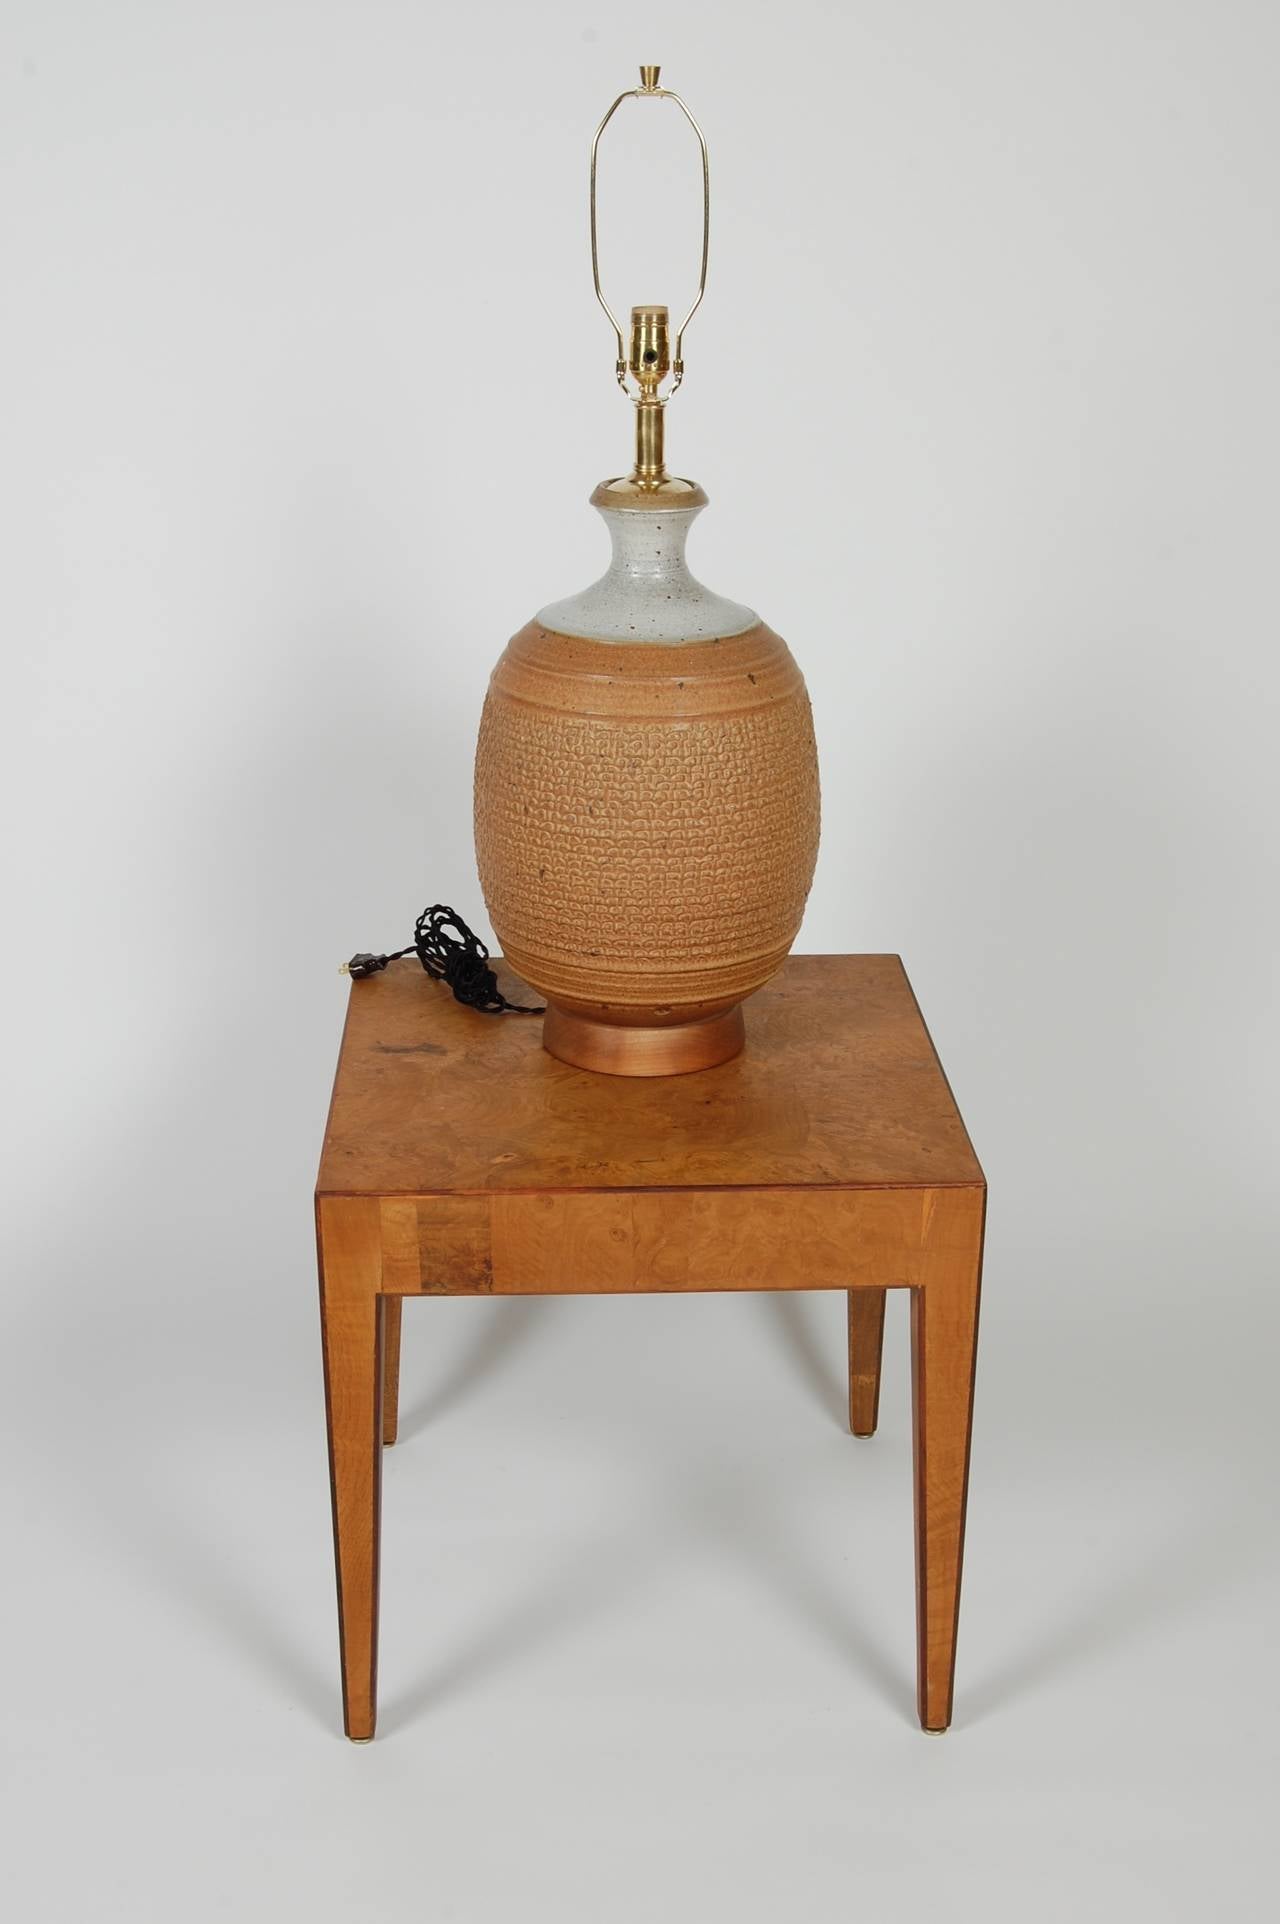 Large studio ceramic lamp by Phil Barkdoll of affiliated craftsman of which Bob Kinzie was a partner. Two-tone body with a textured earthenware bottom and a lighter glazed top. Stamped with the potters mark, new hardware and wiring.